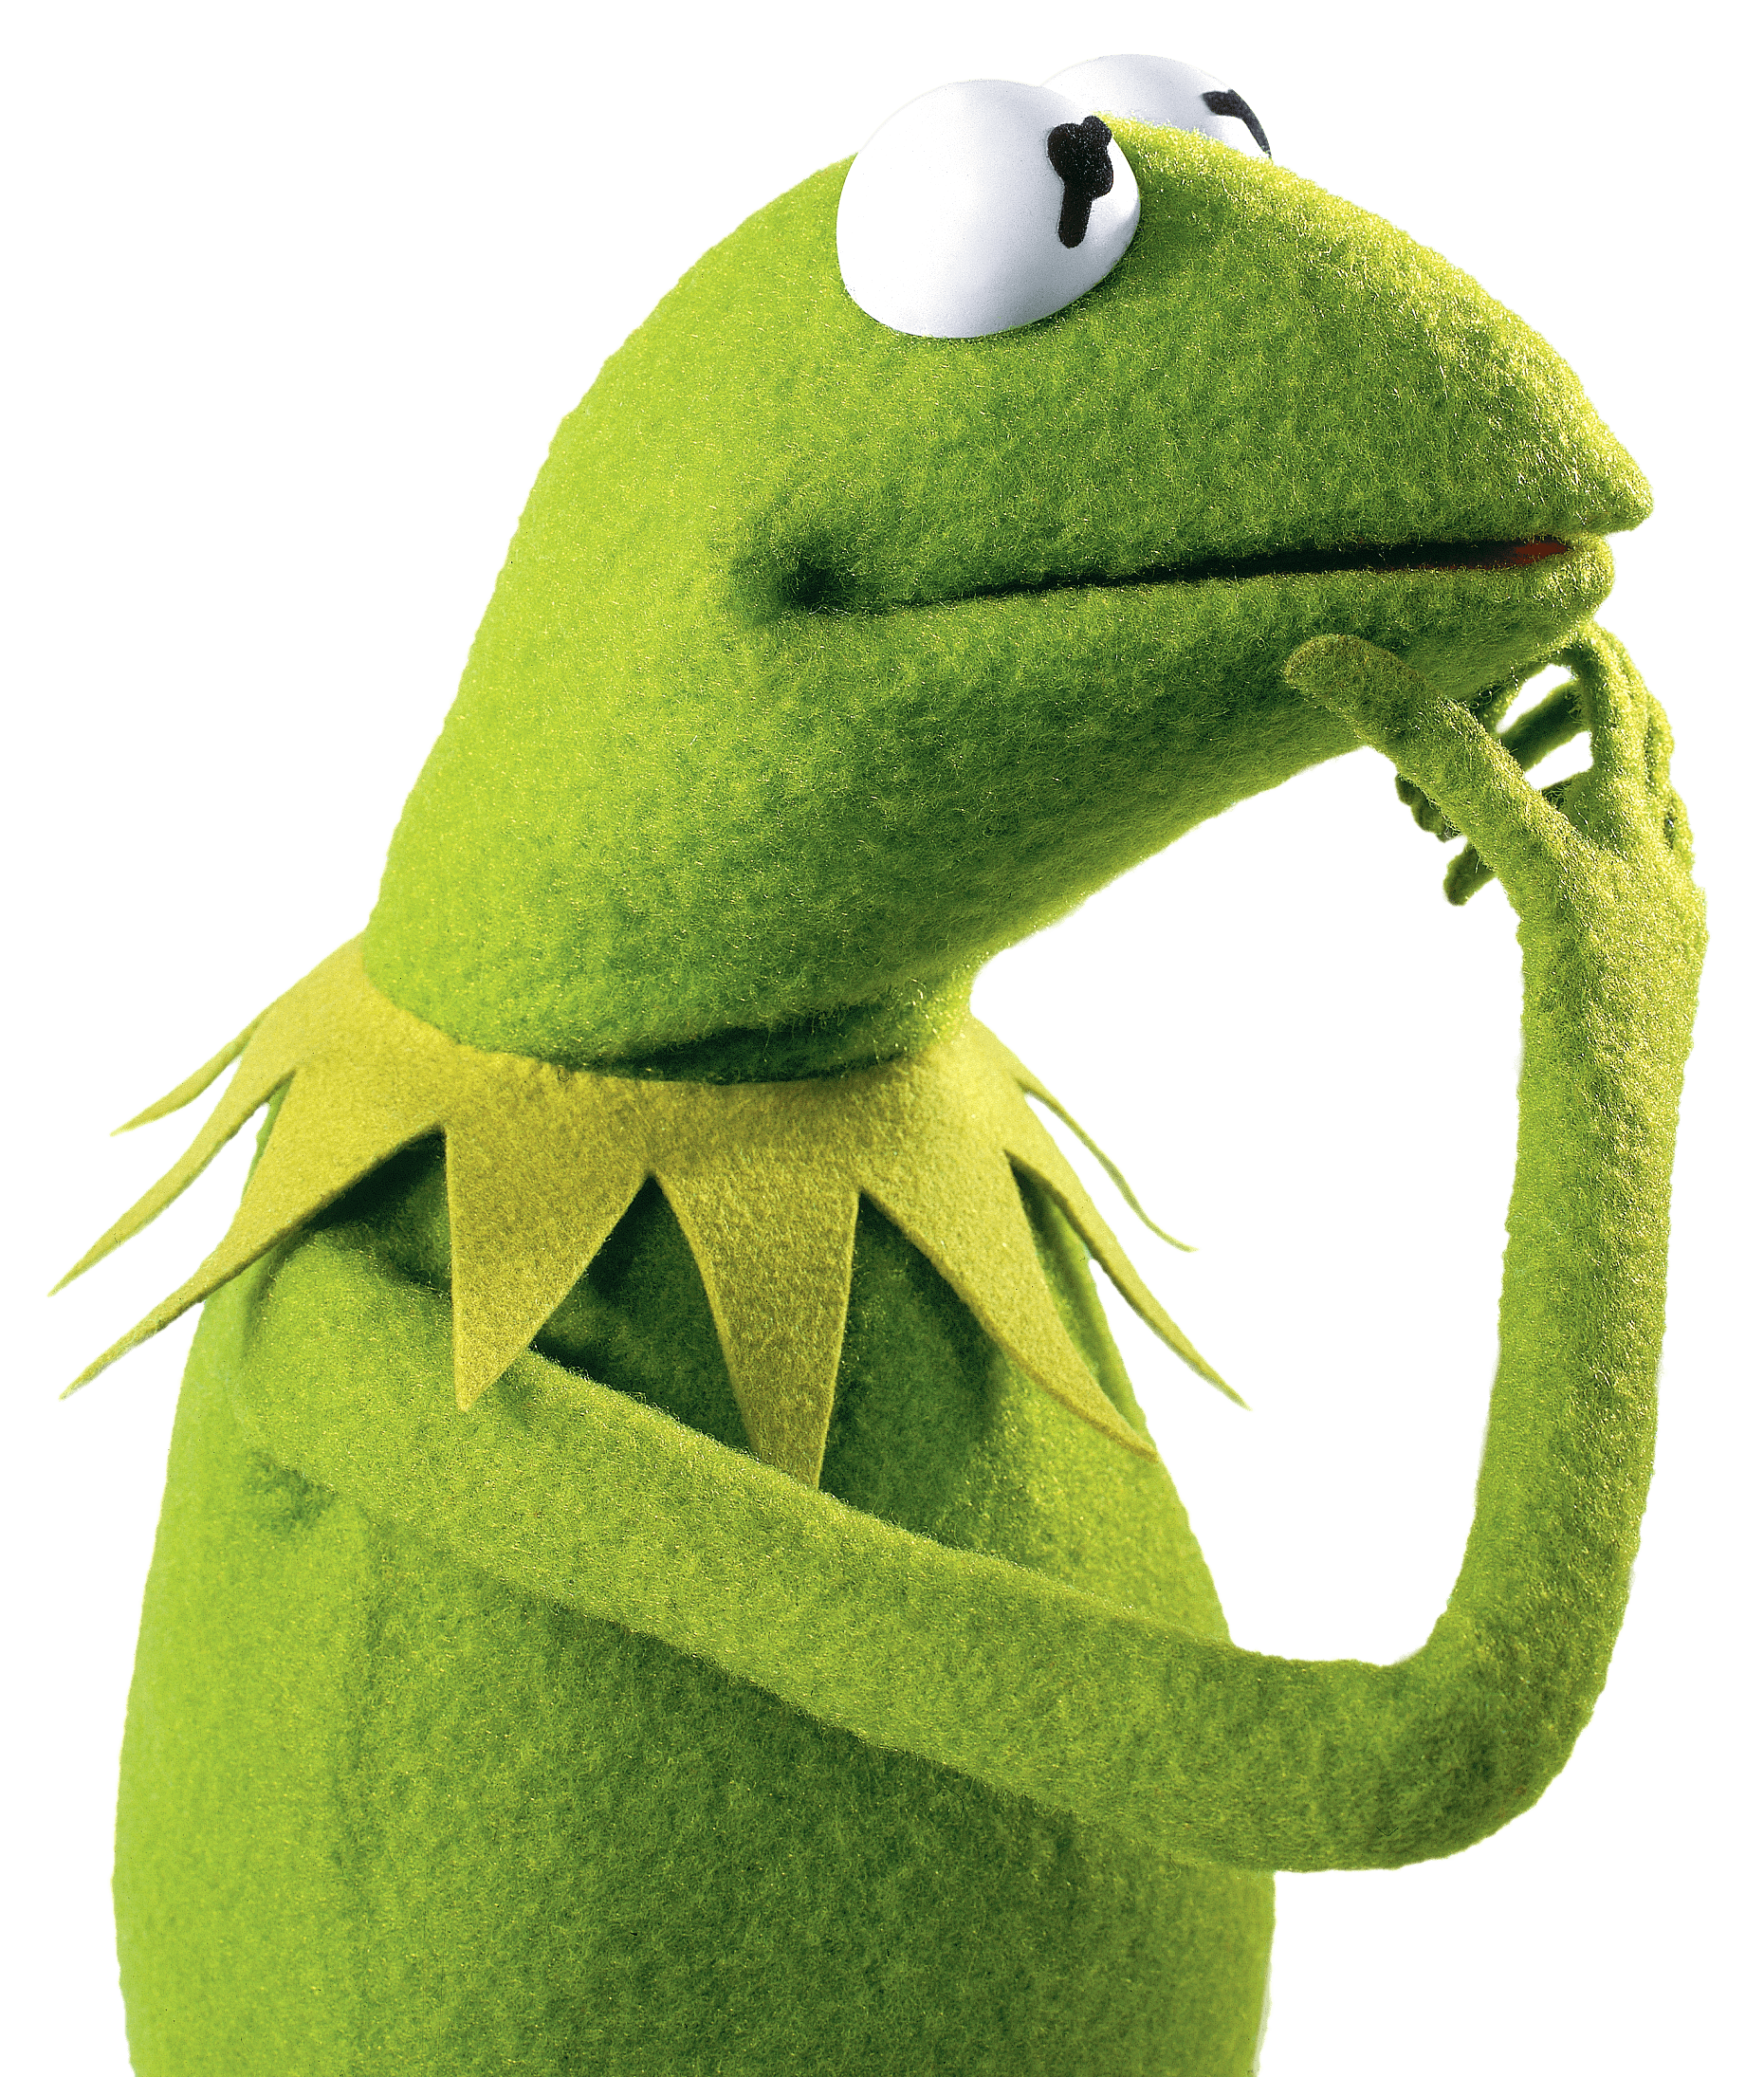 Kermit the Frog Thinking SVG Clip arts